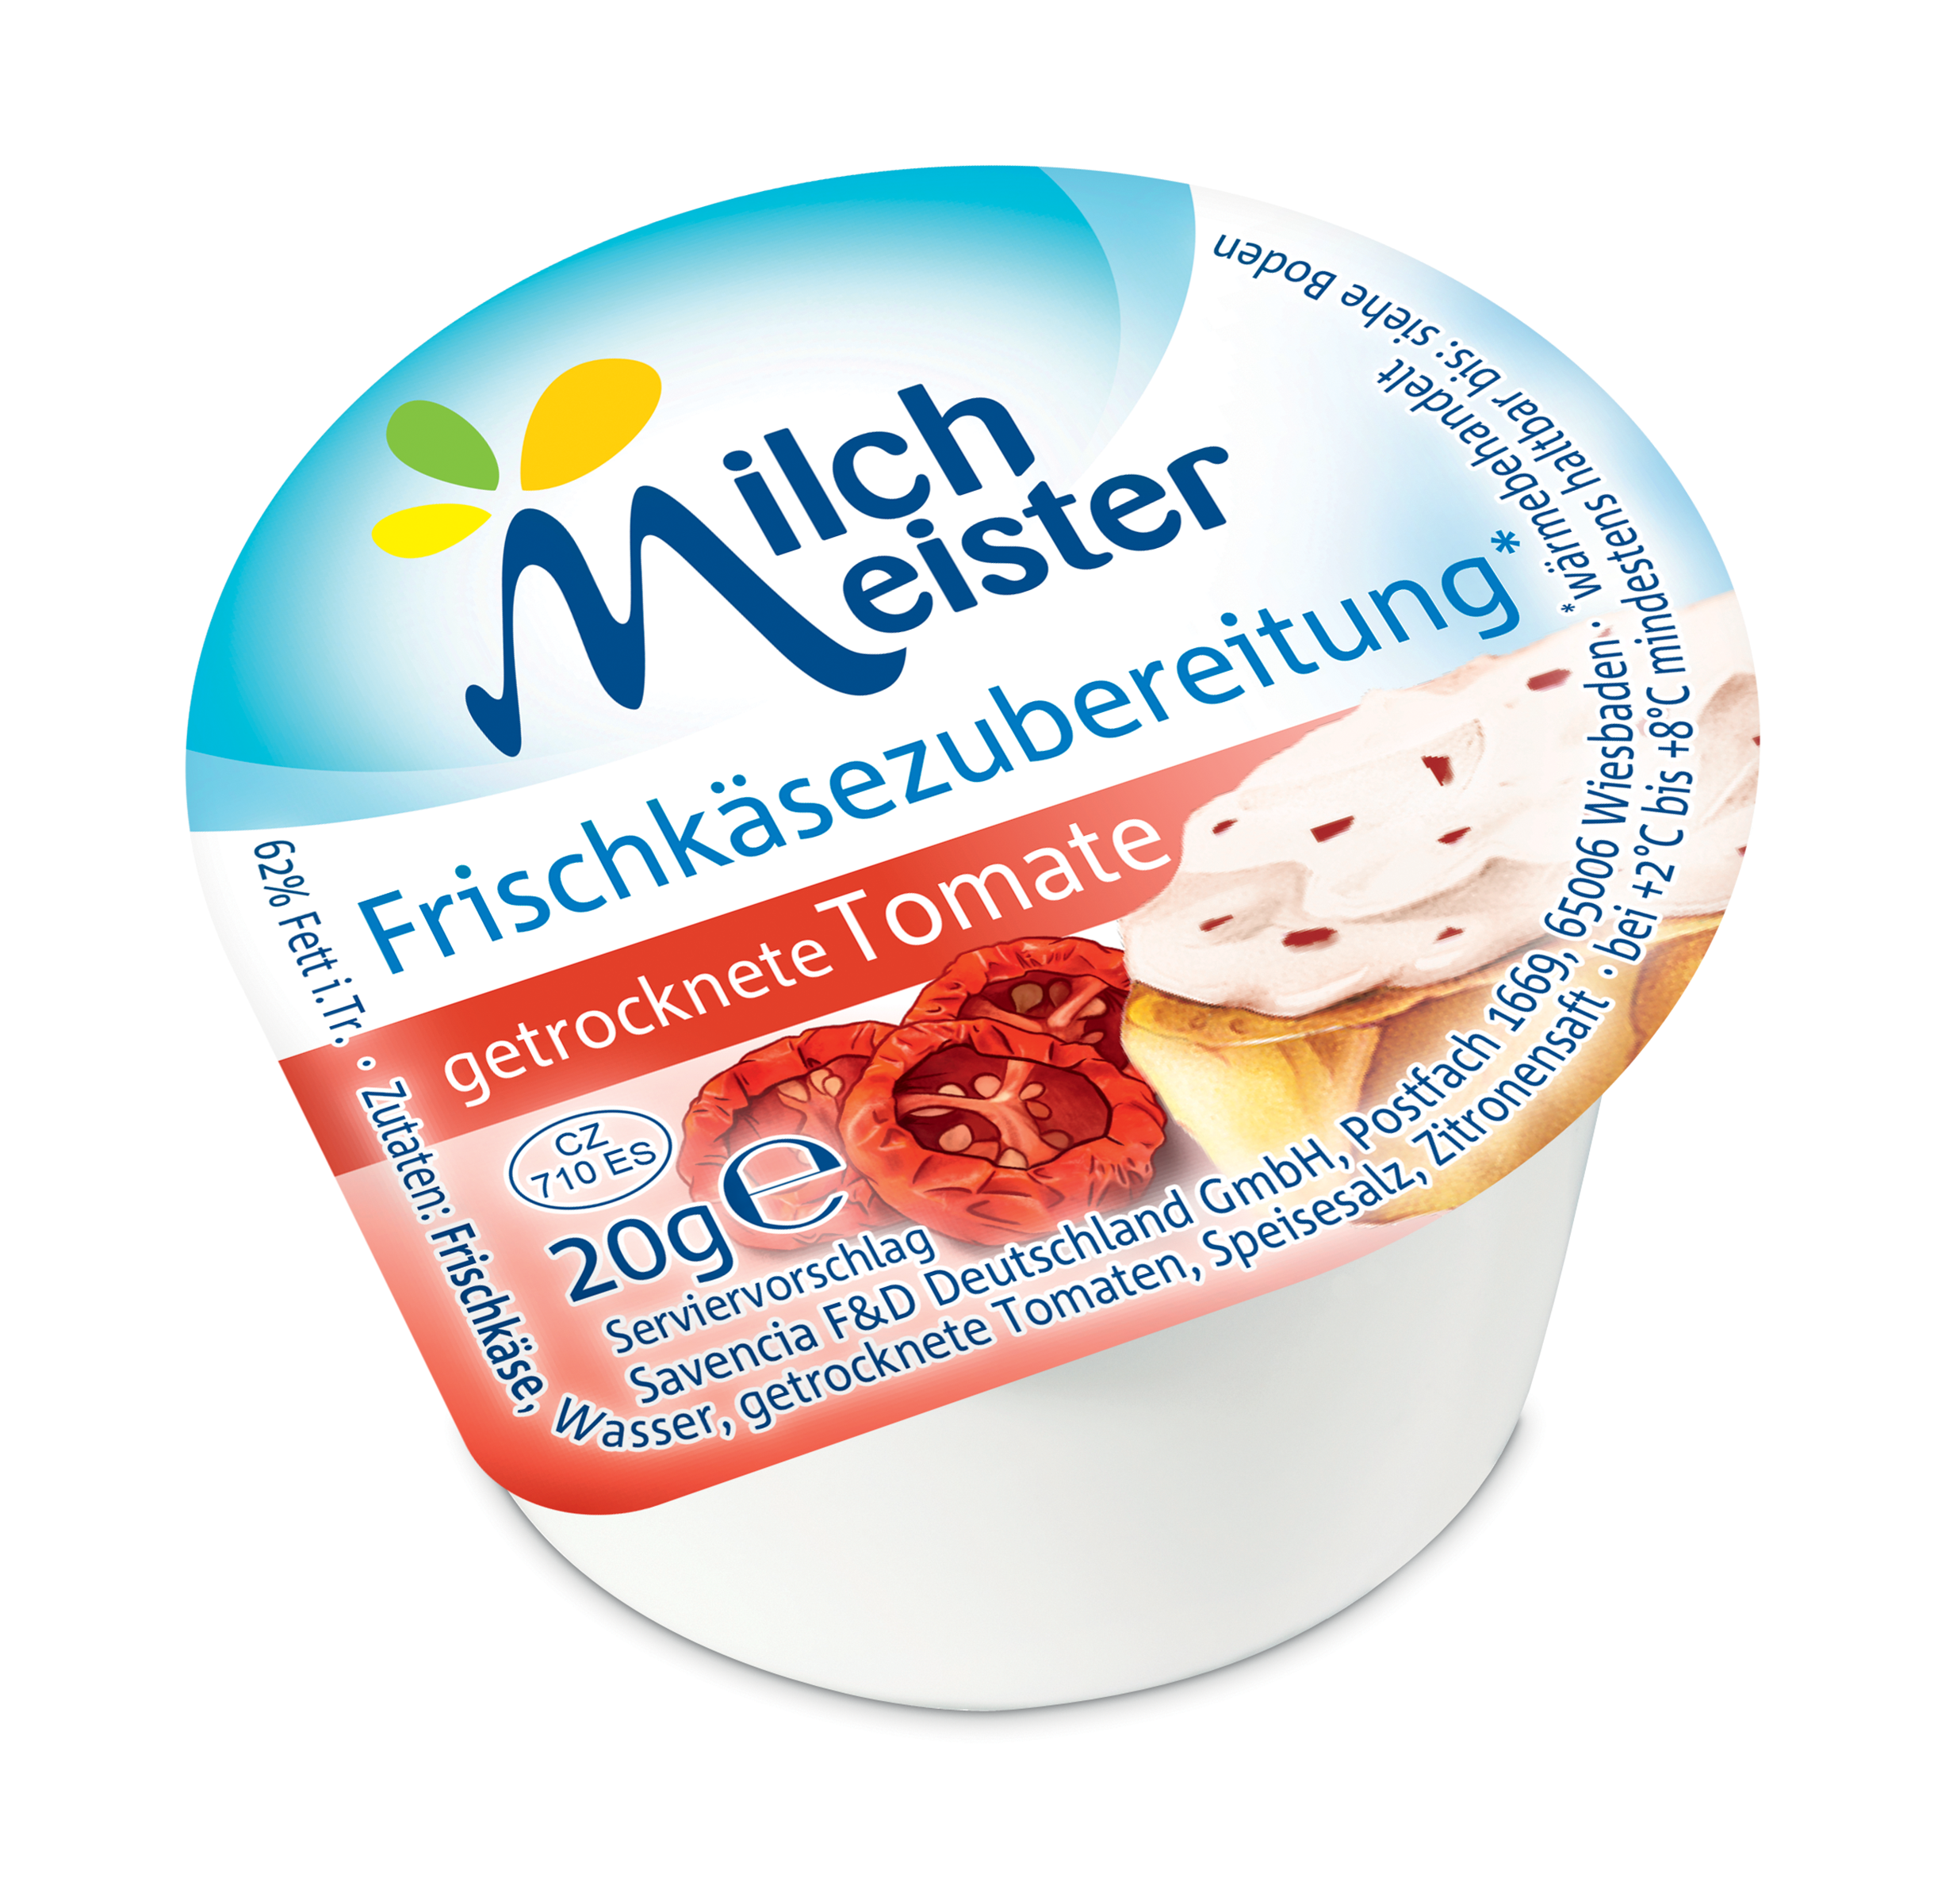 MilchMeister FK getr Tomate 60x20g